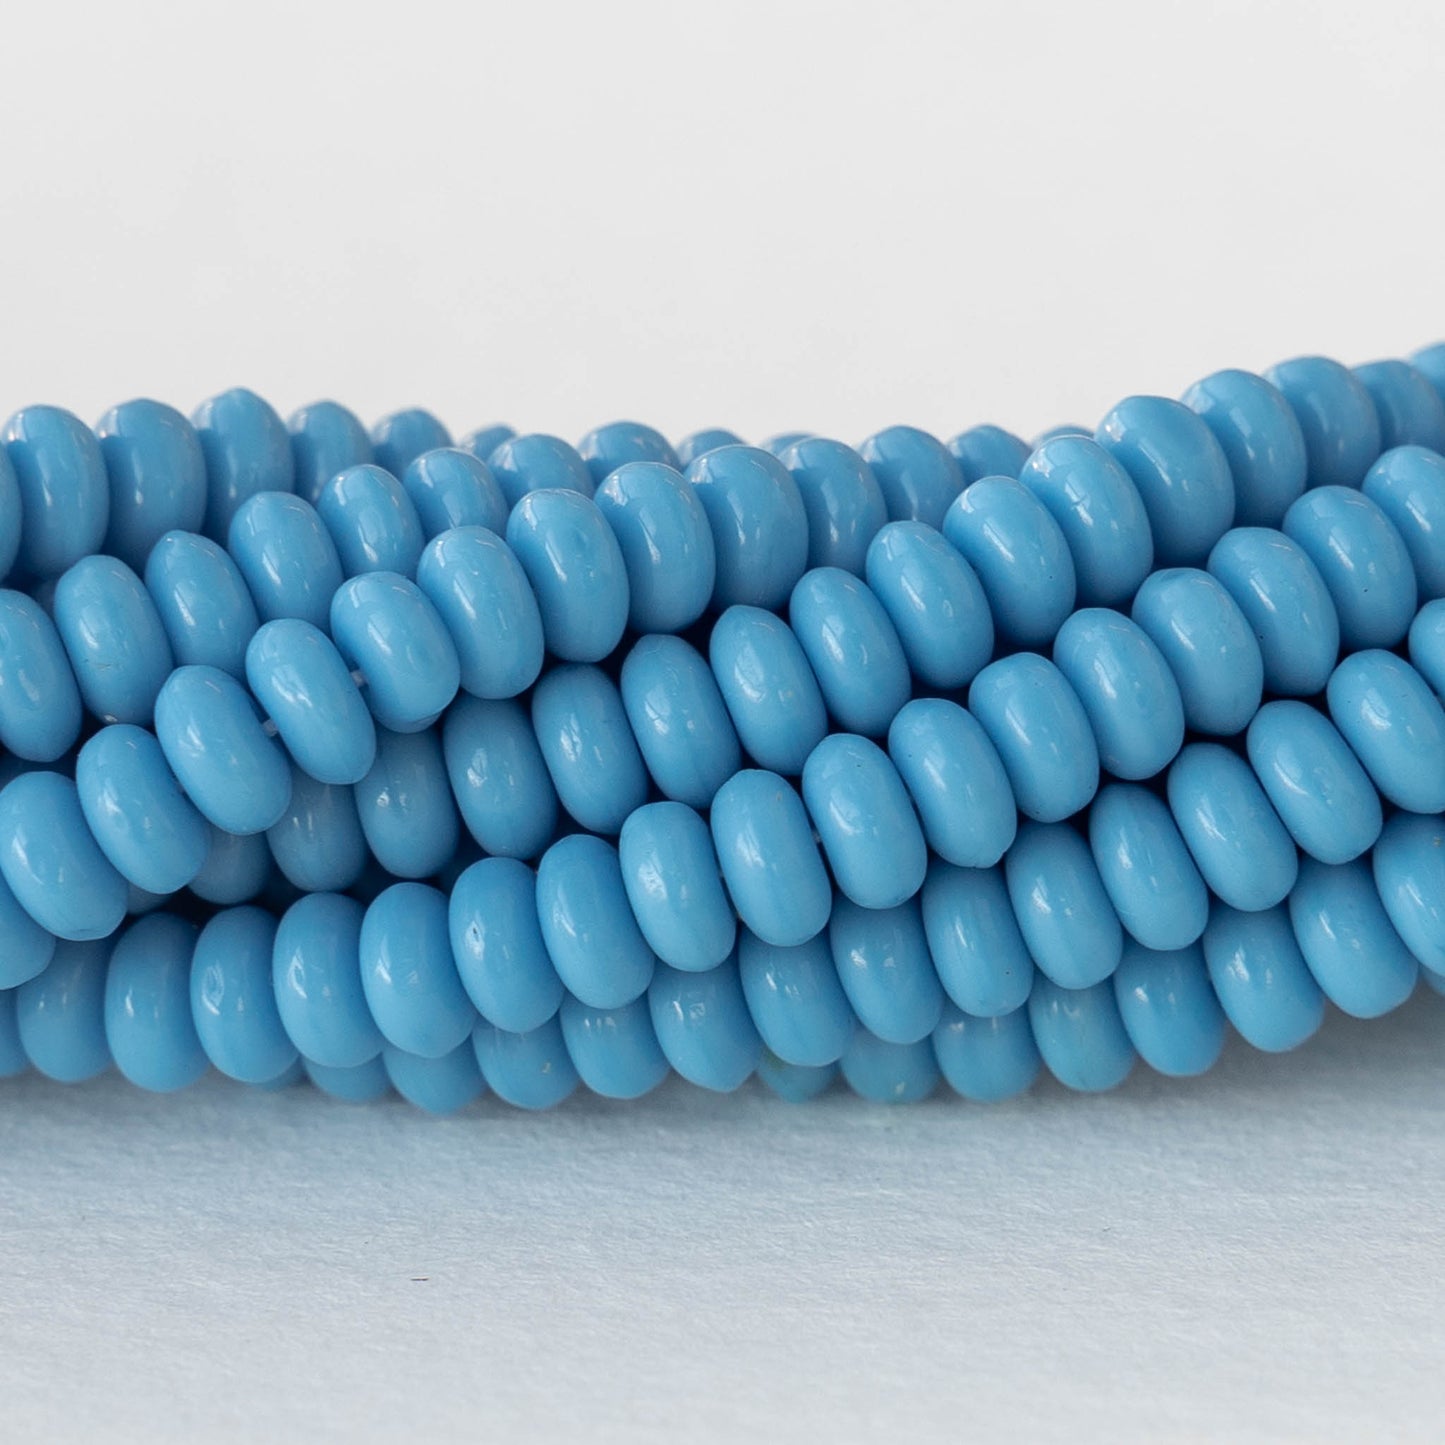 4mm Rondelle Beads - Opaque Blue Turquoise - 100 Beads